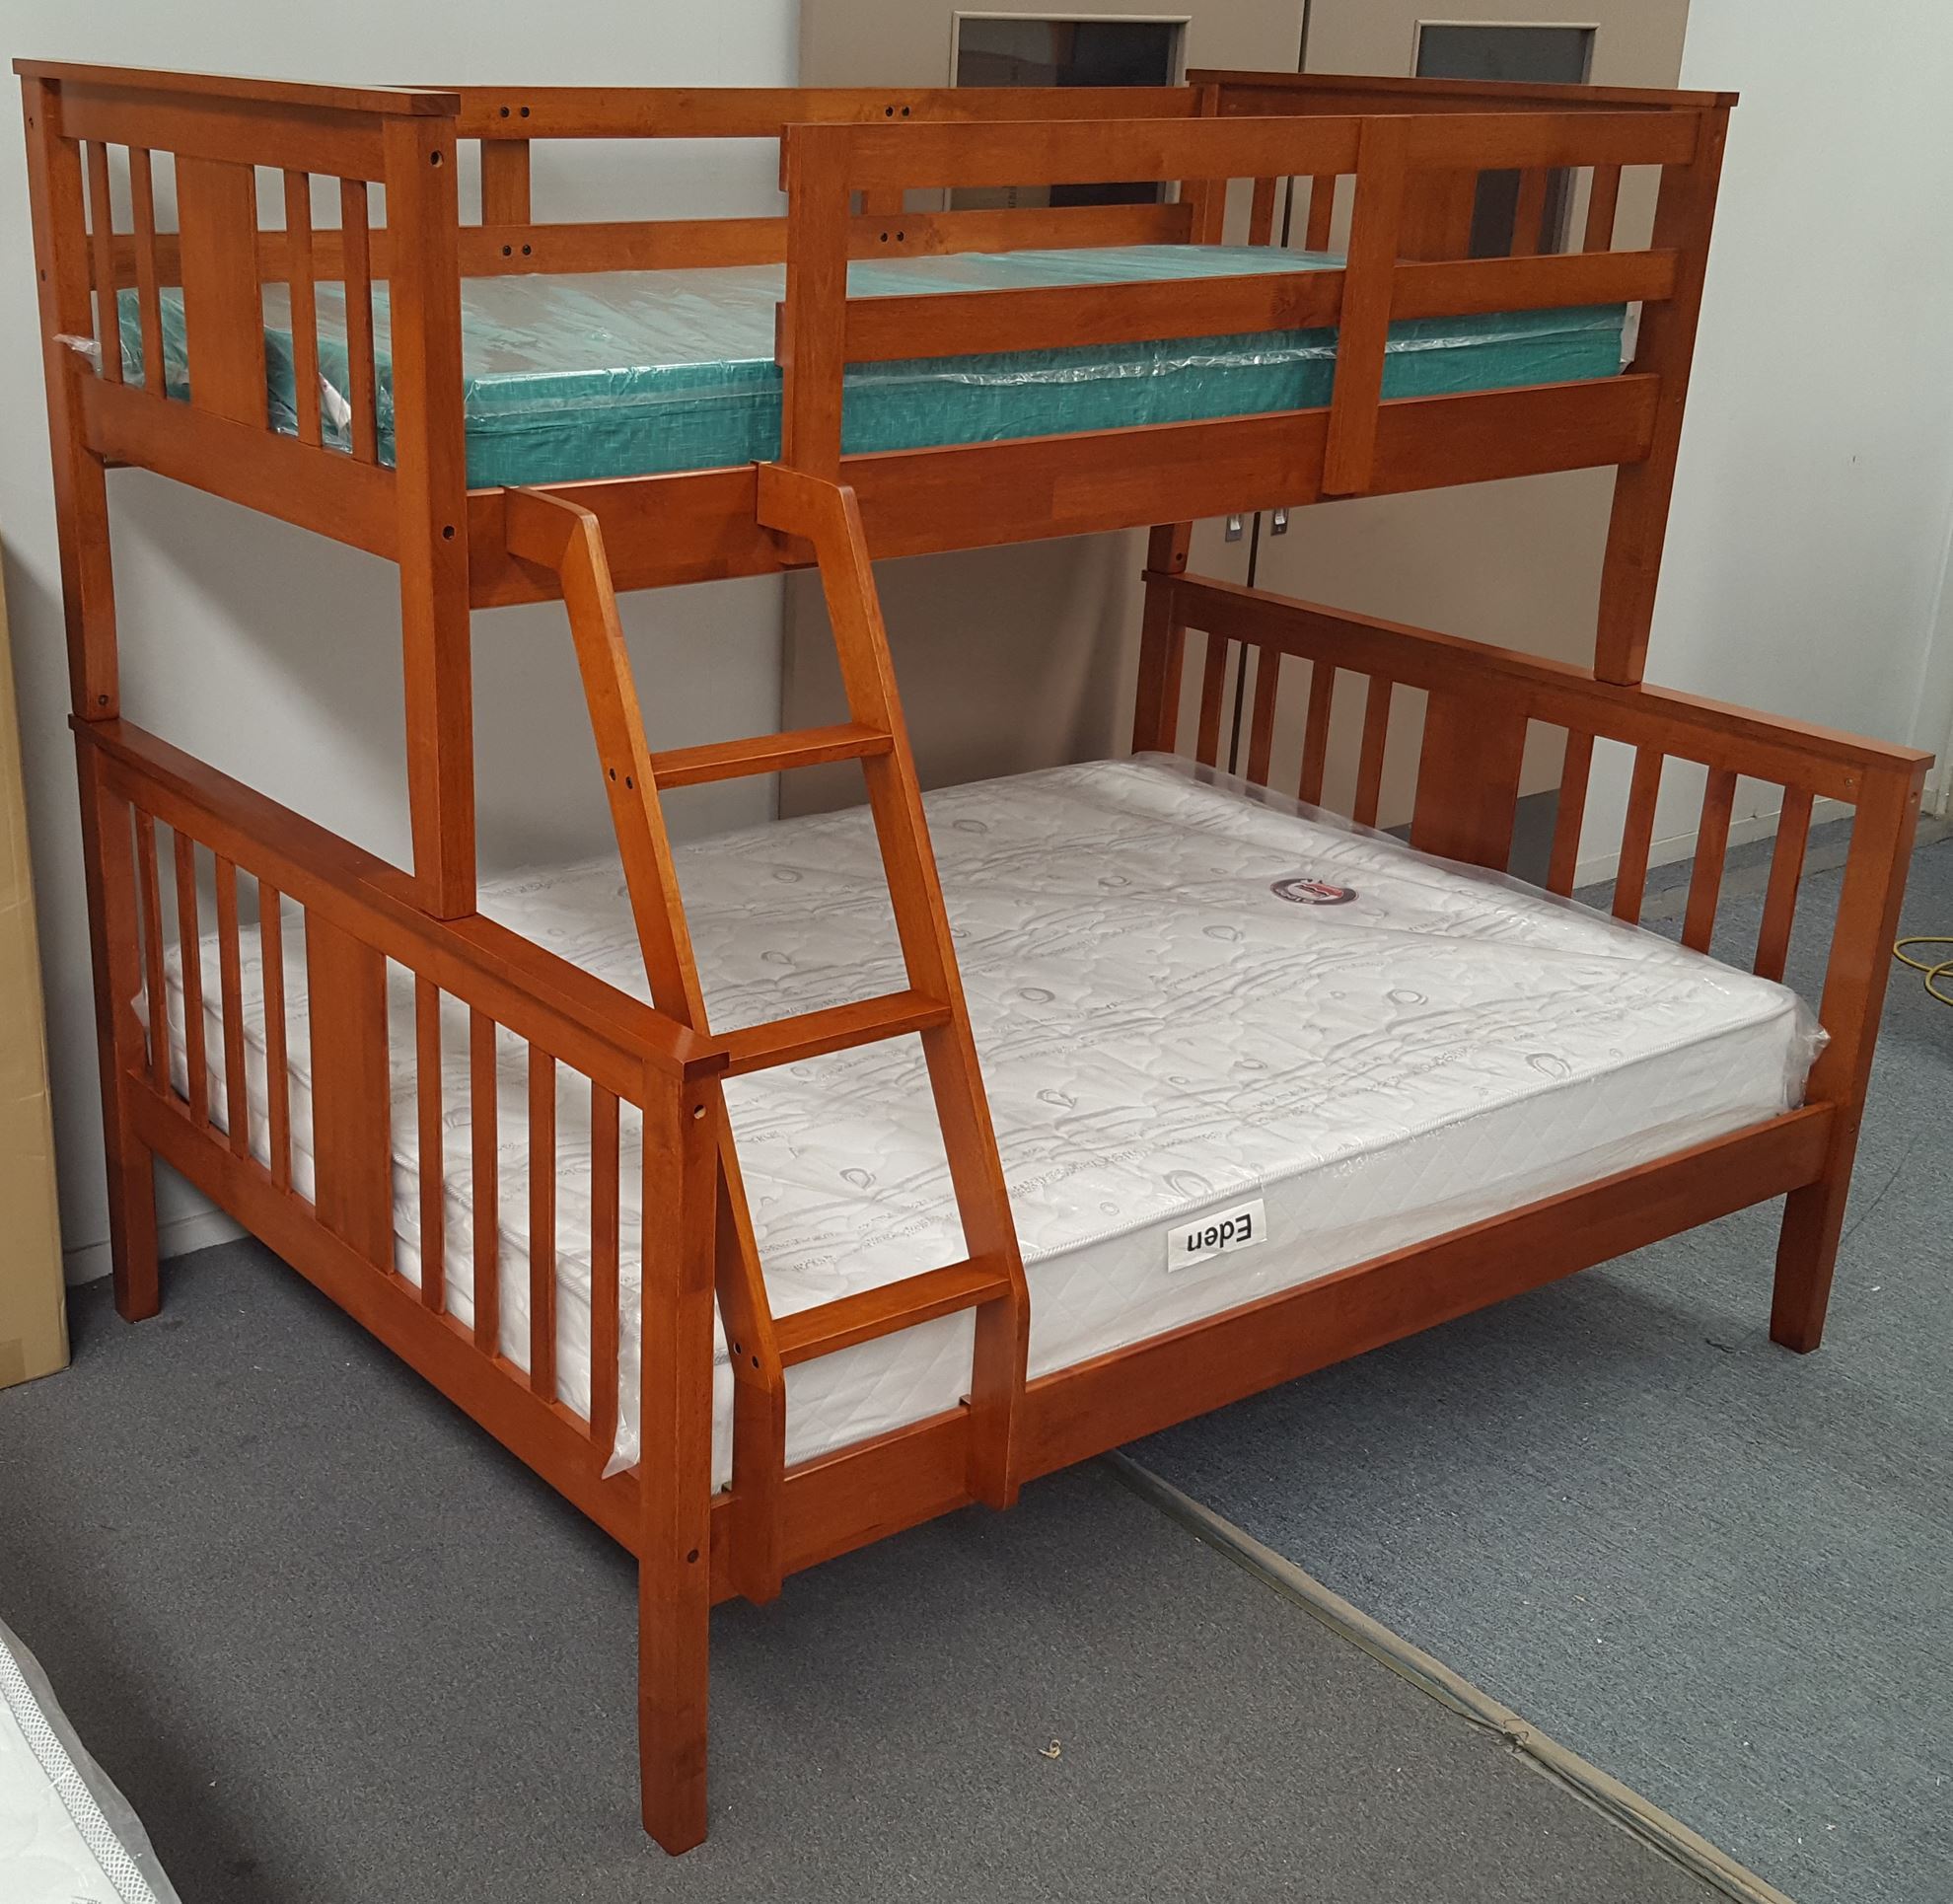 Holly Single Double Bunk Bed, Double Bunk Beds With Mattress